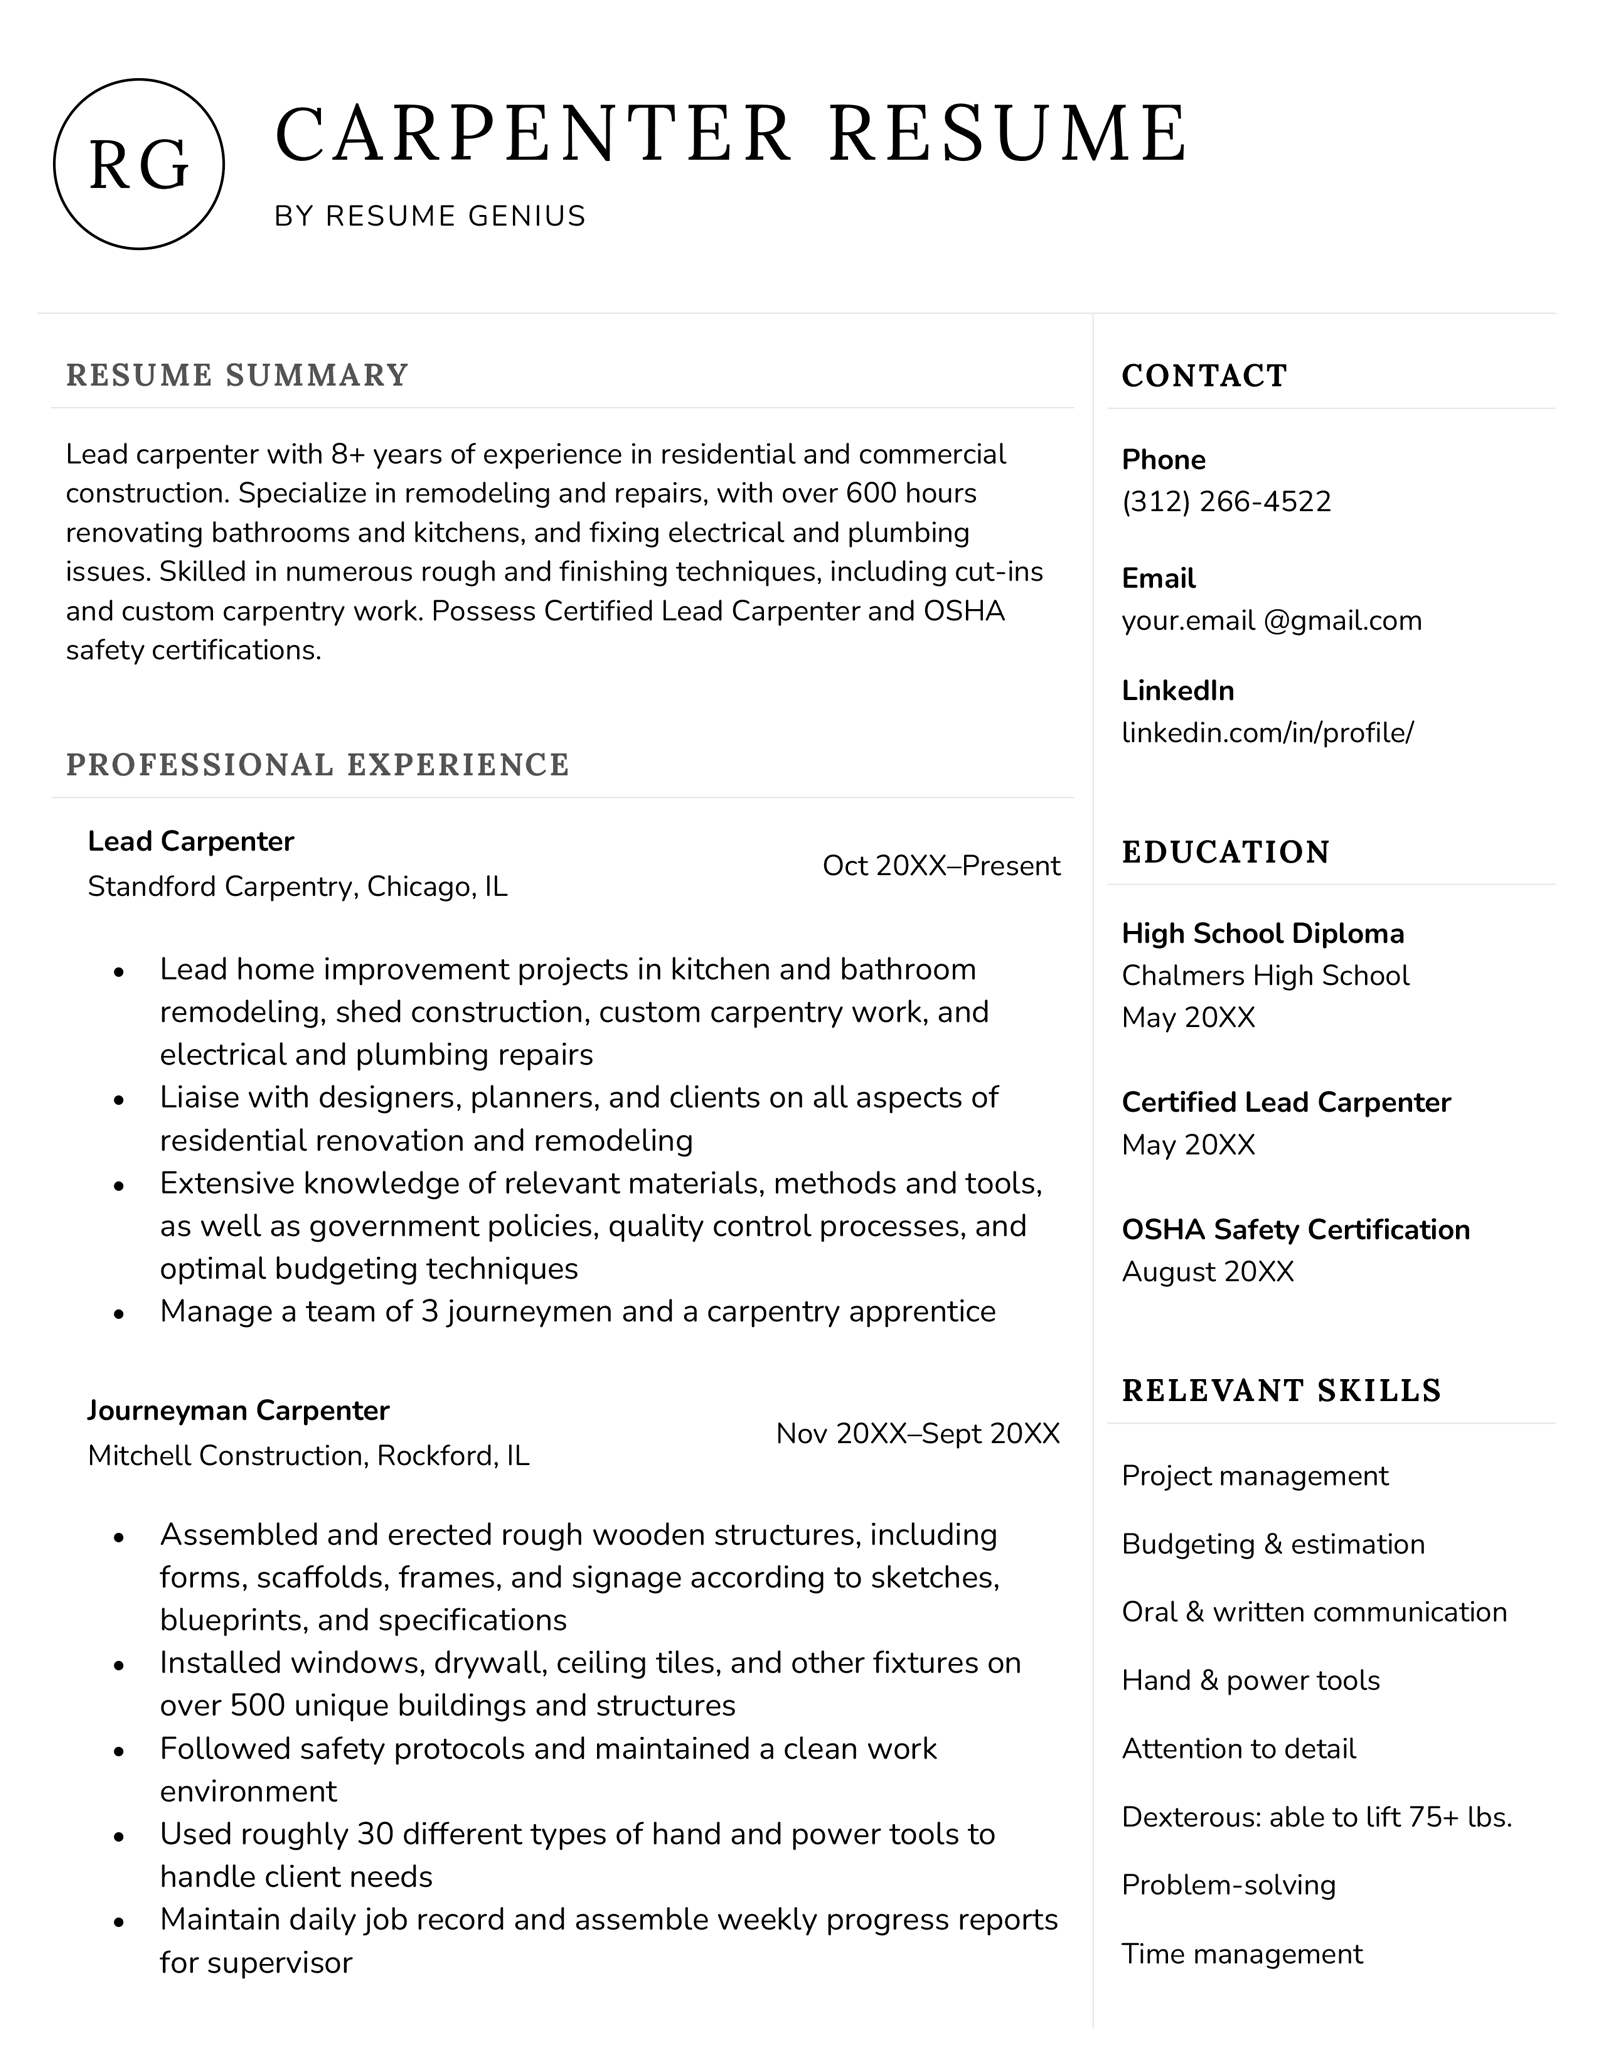 An example of a carpenter resume